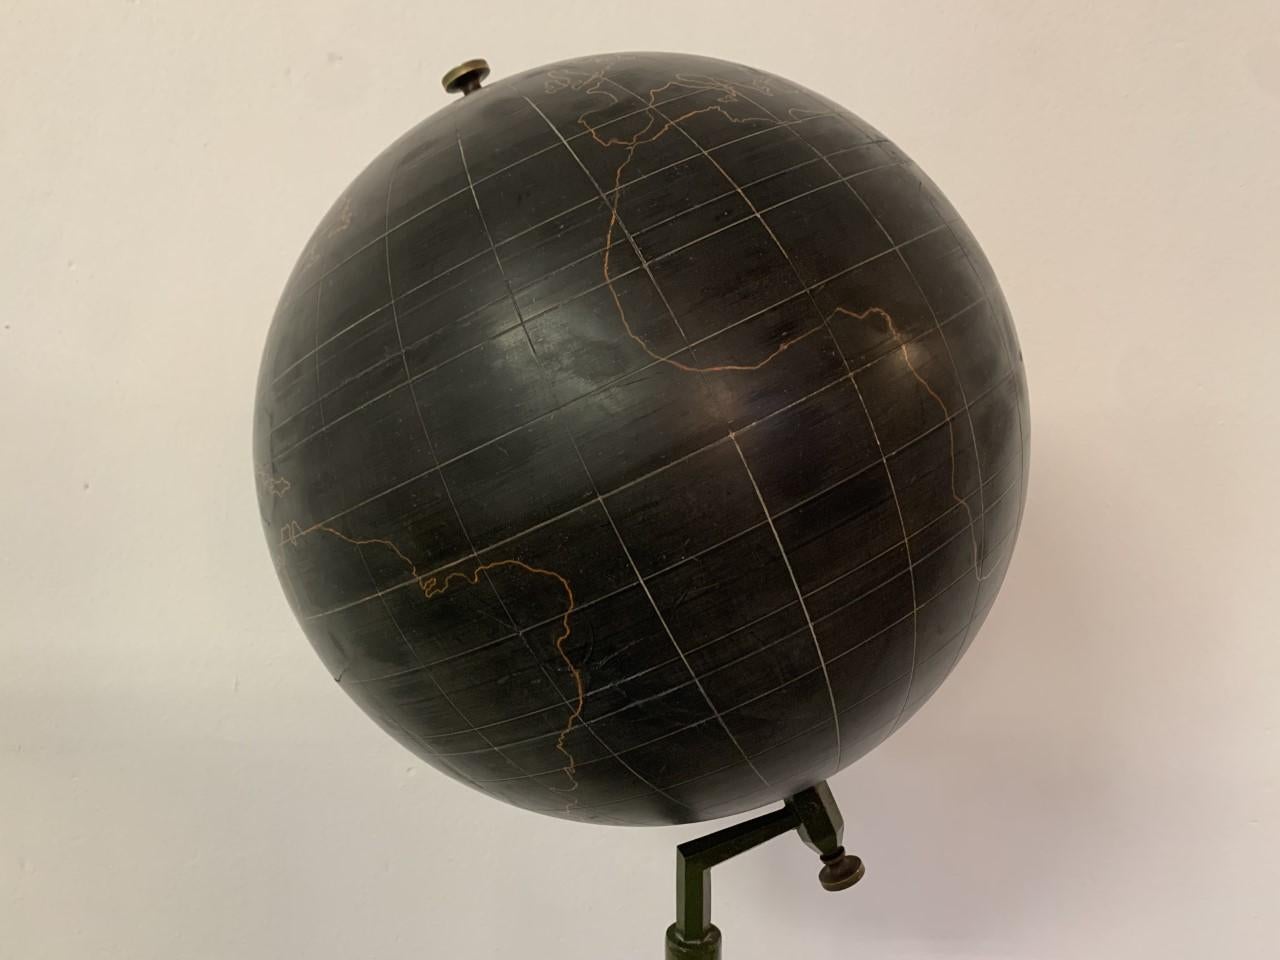 Large Globe floor stand, metal, resin, Belgium, 1950s.

Beautiful globe on a floor stand. The reserved, almost monochromatic color scheme in black and red lining gives the item a sculptural appearance. The strong metal stem on a round base is